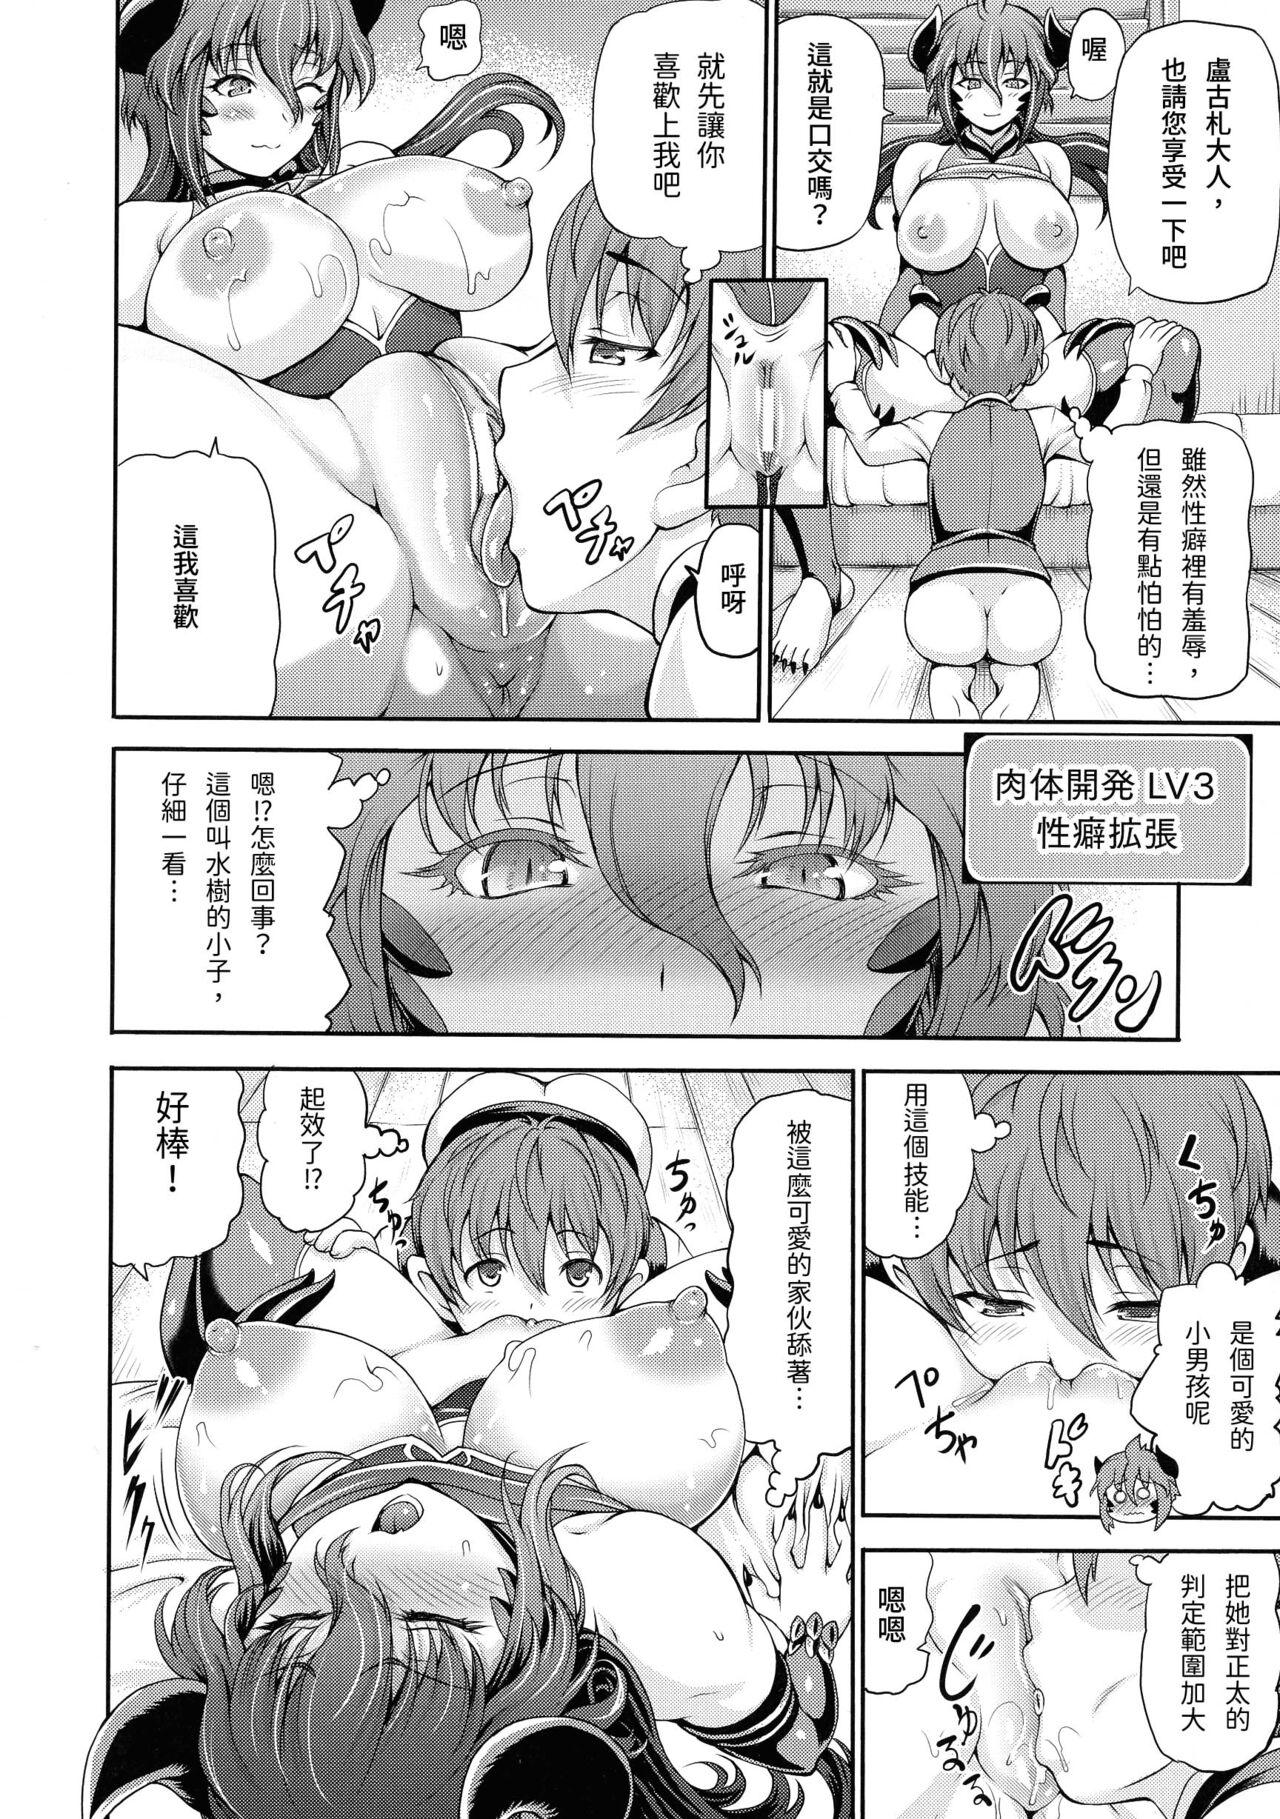 Ass Fetish Isekai Shoukan 2 Ch. 1-4, 6 Hole - Page 10